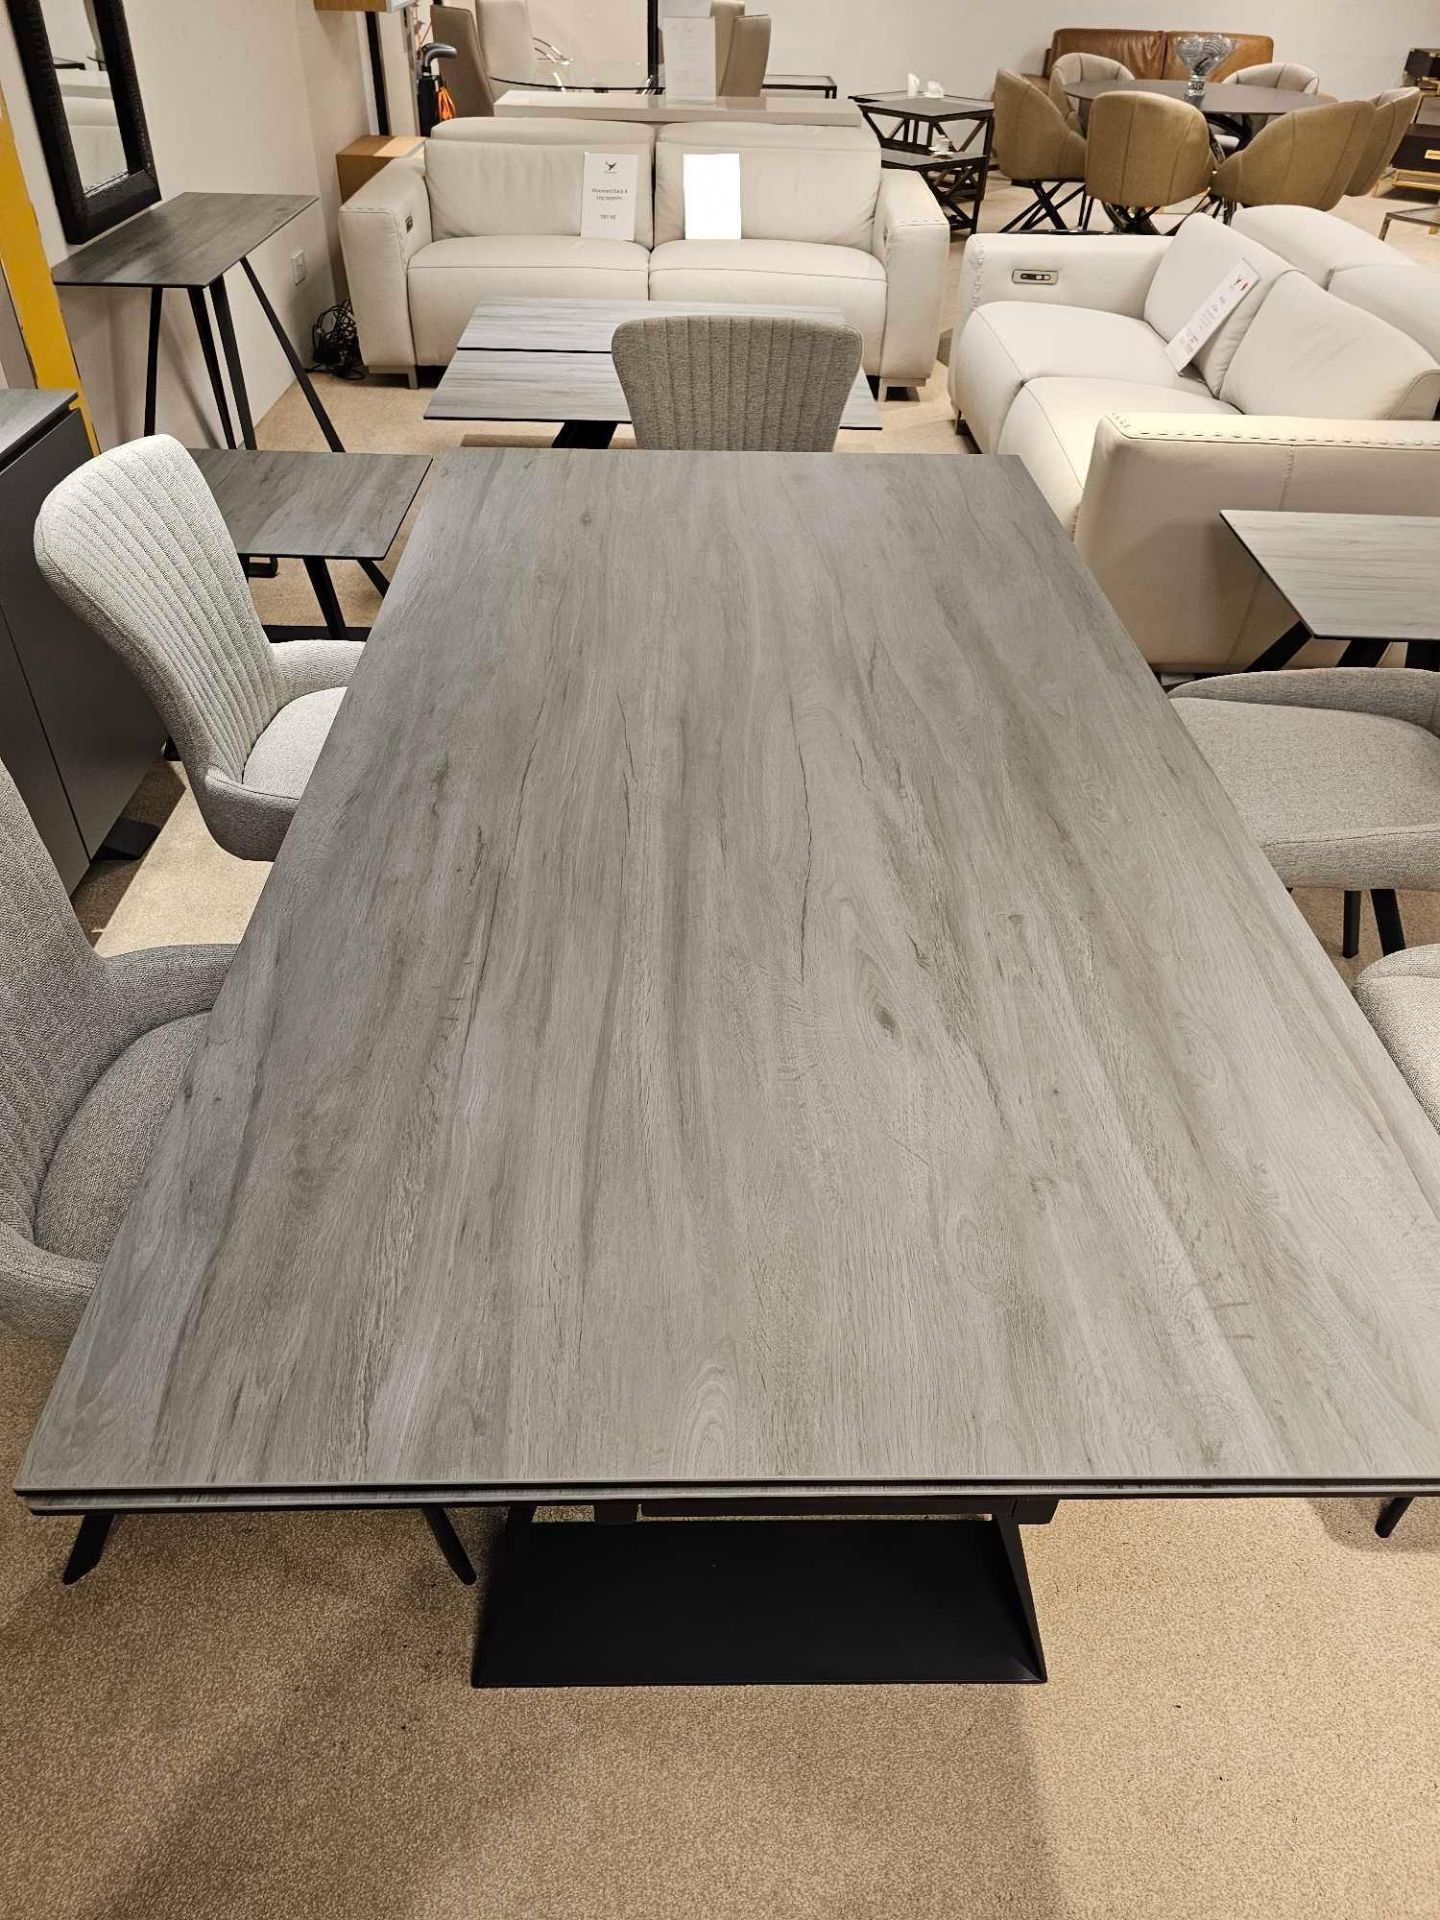 Spartan Dining Table by Kesterport The Spartan Dining Table is part of a sophisticated collection of - Bild 11 aus 12